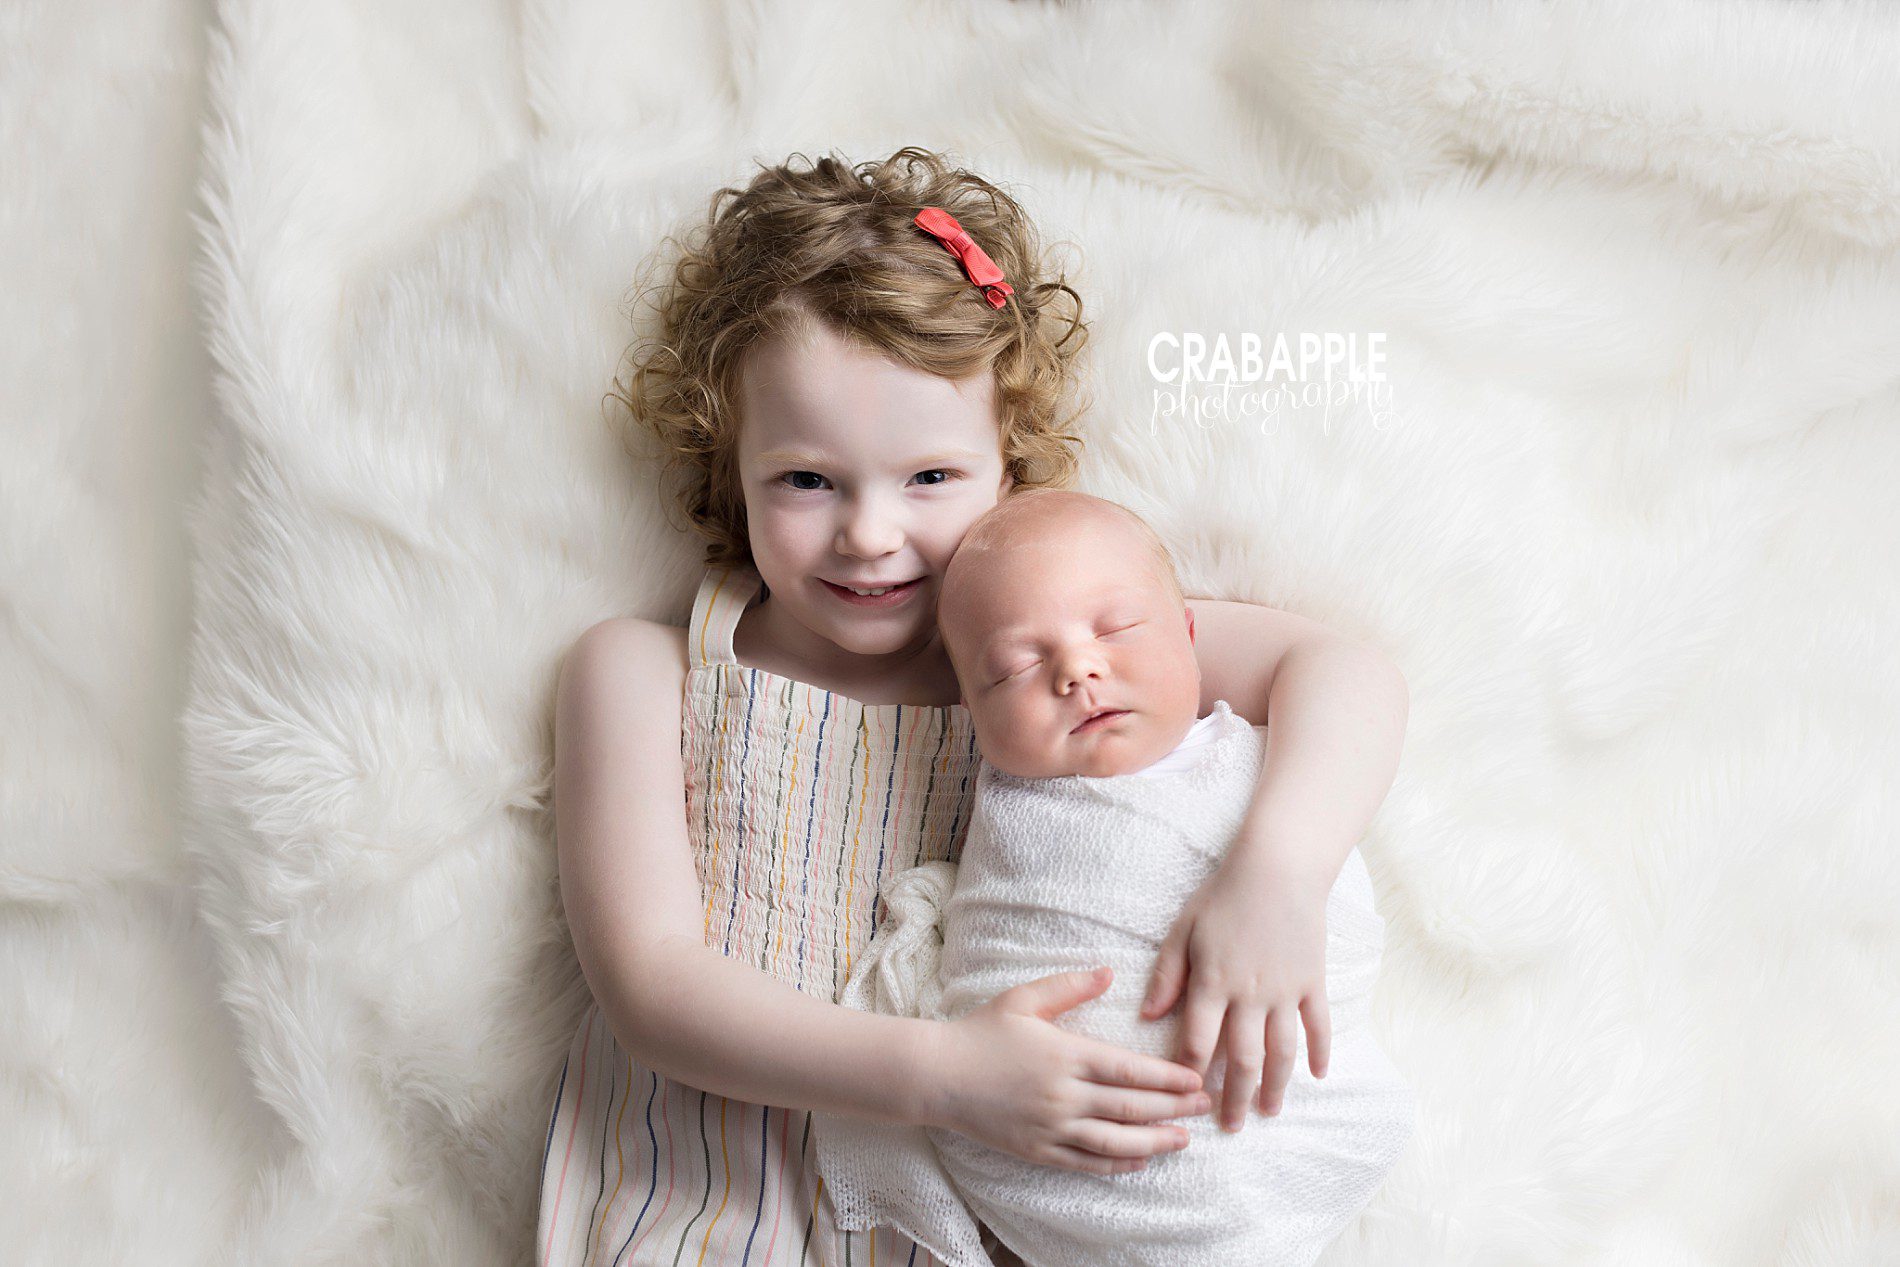 sibling photo ideas with newborn